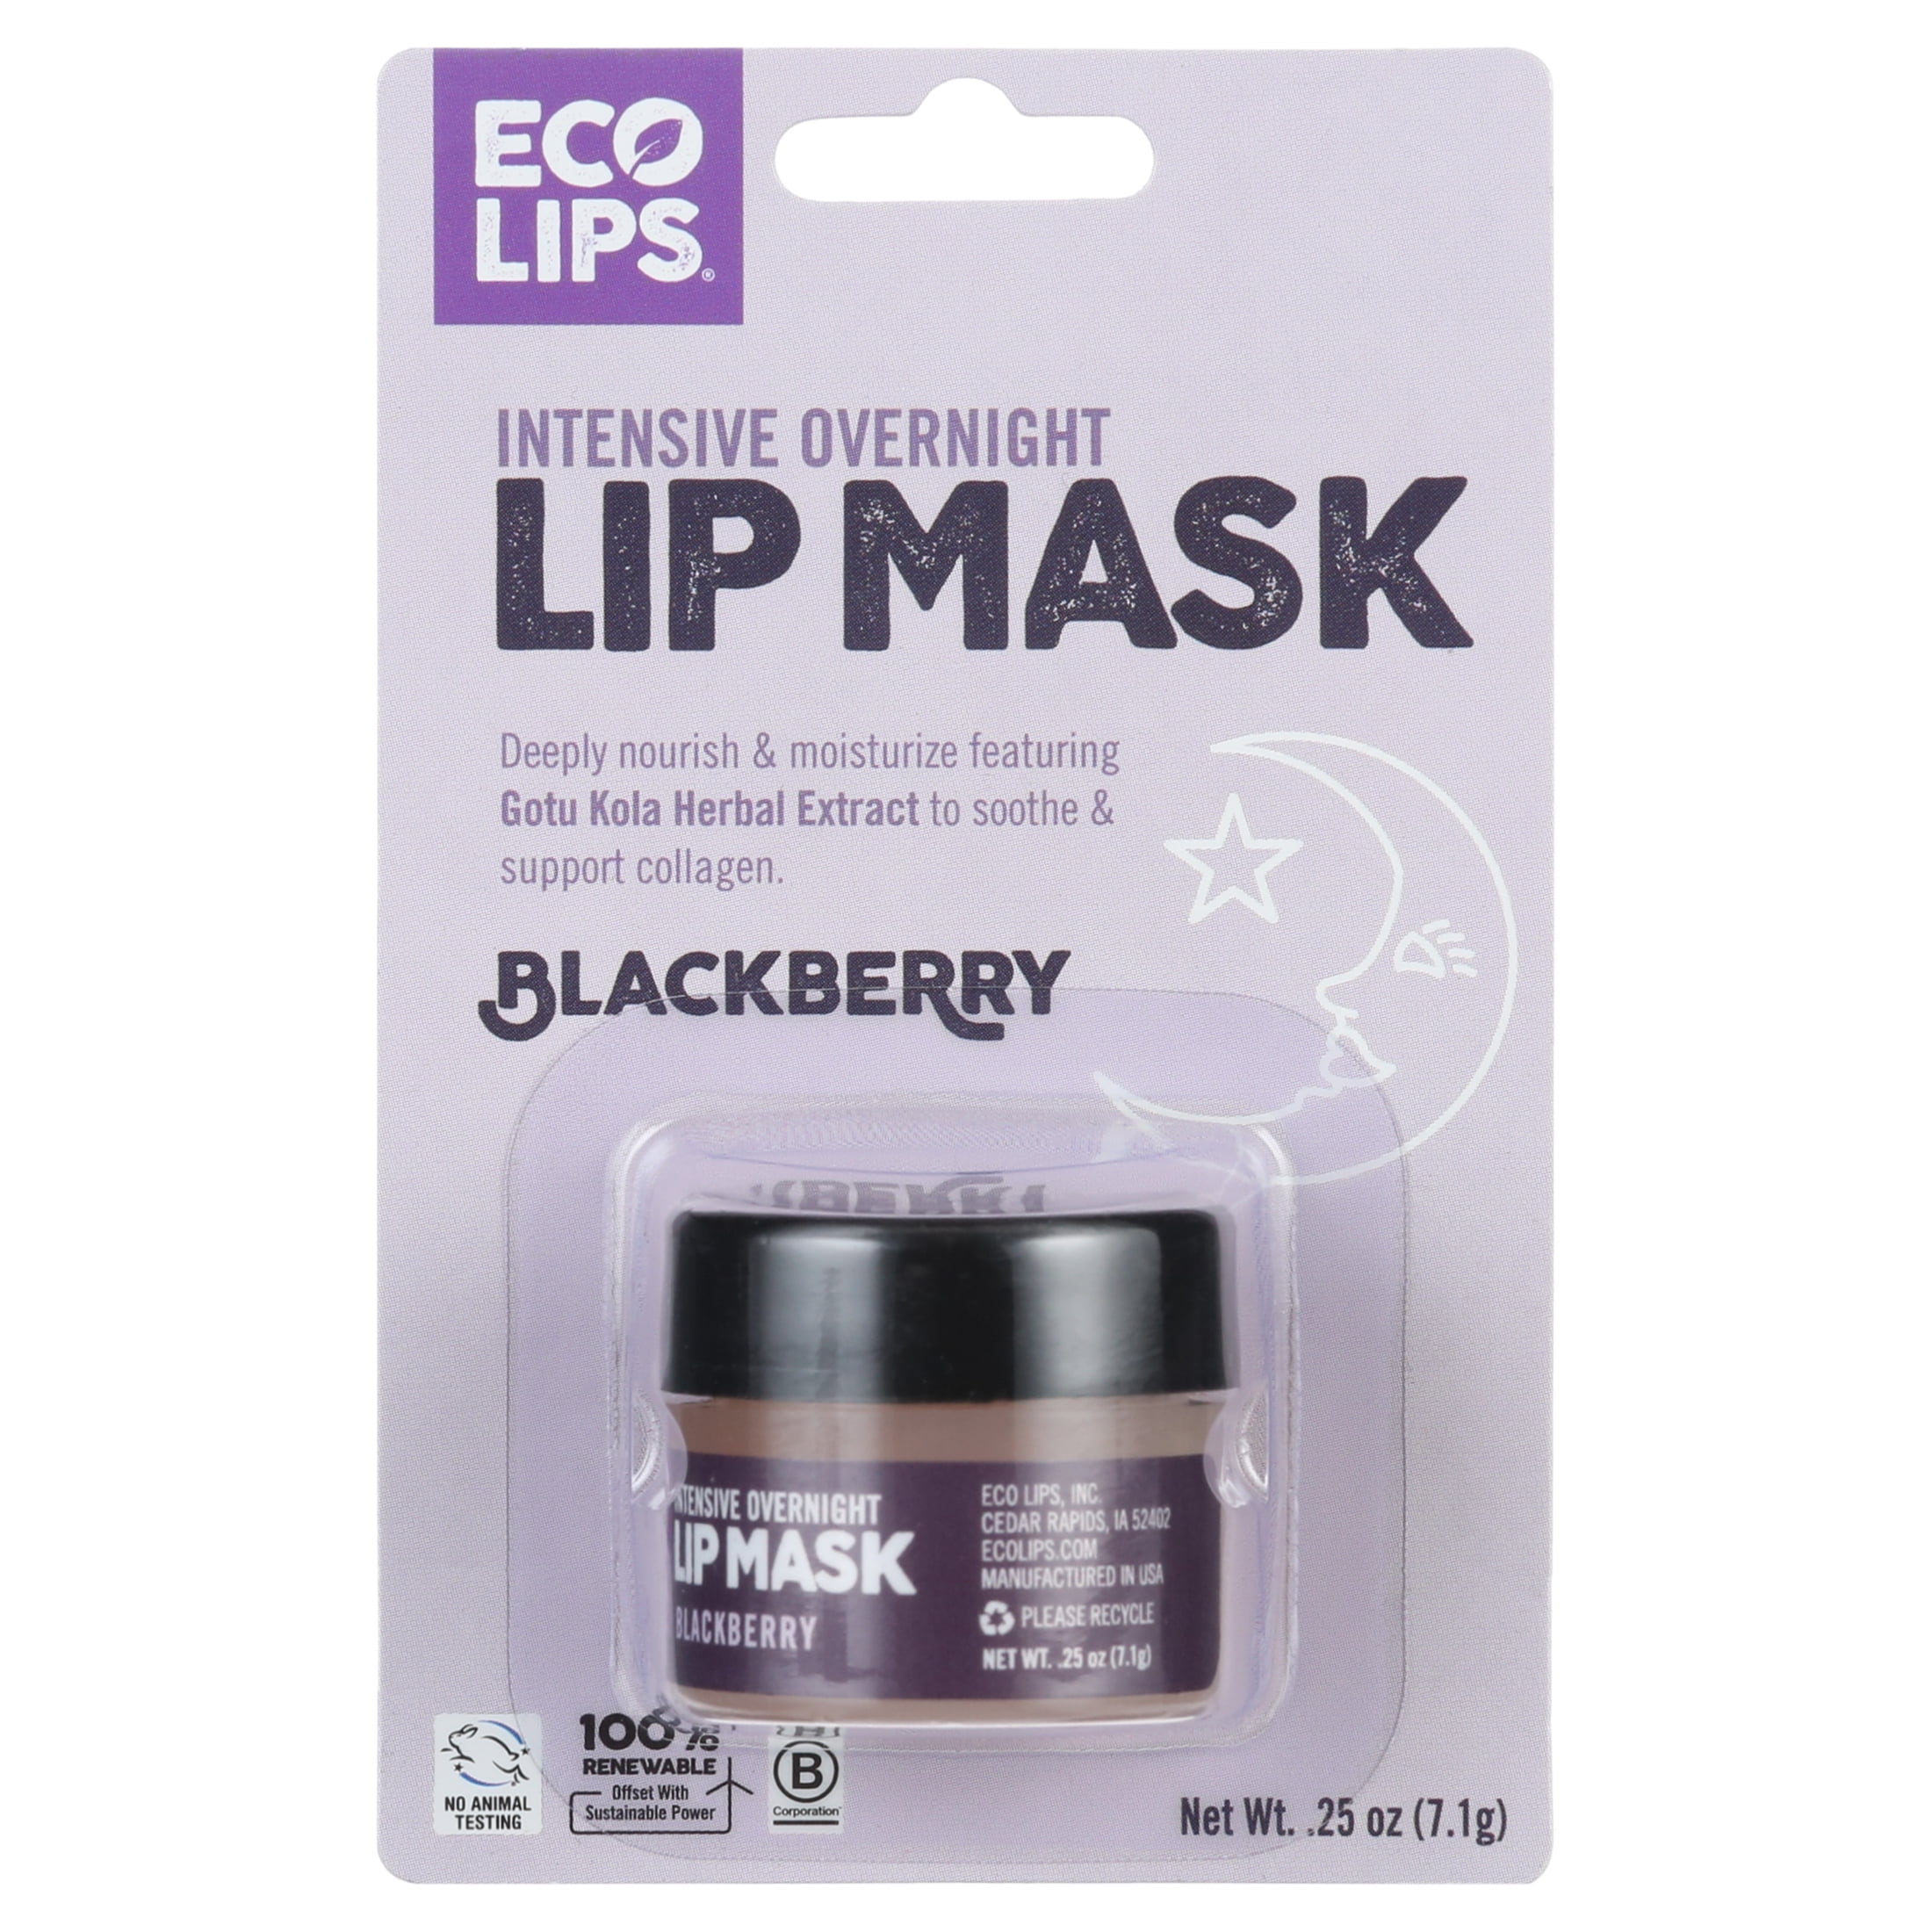 Eco Lips Overnight Intensive Lip Mask with Blackberry, .34oz 1ct